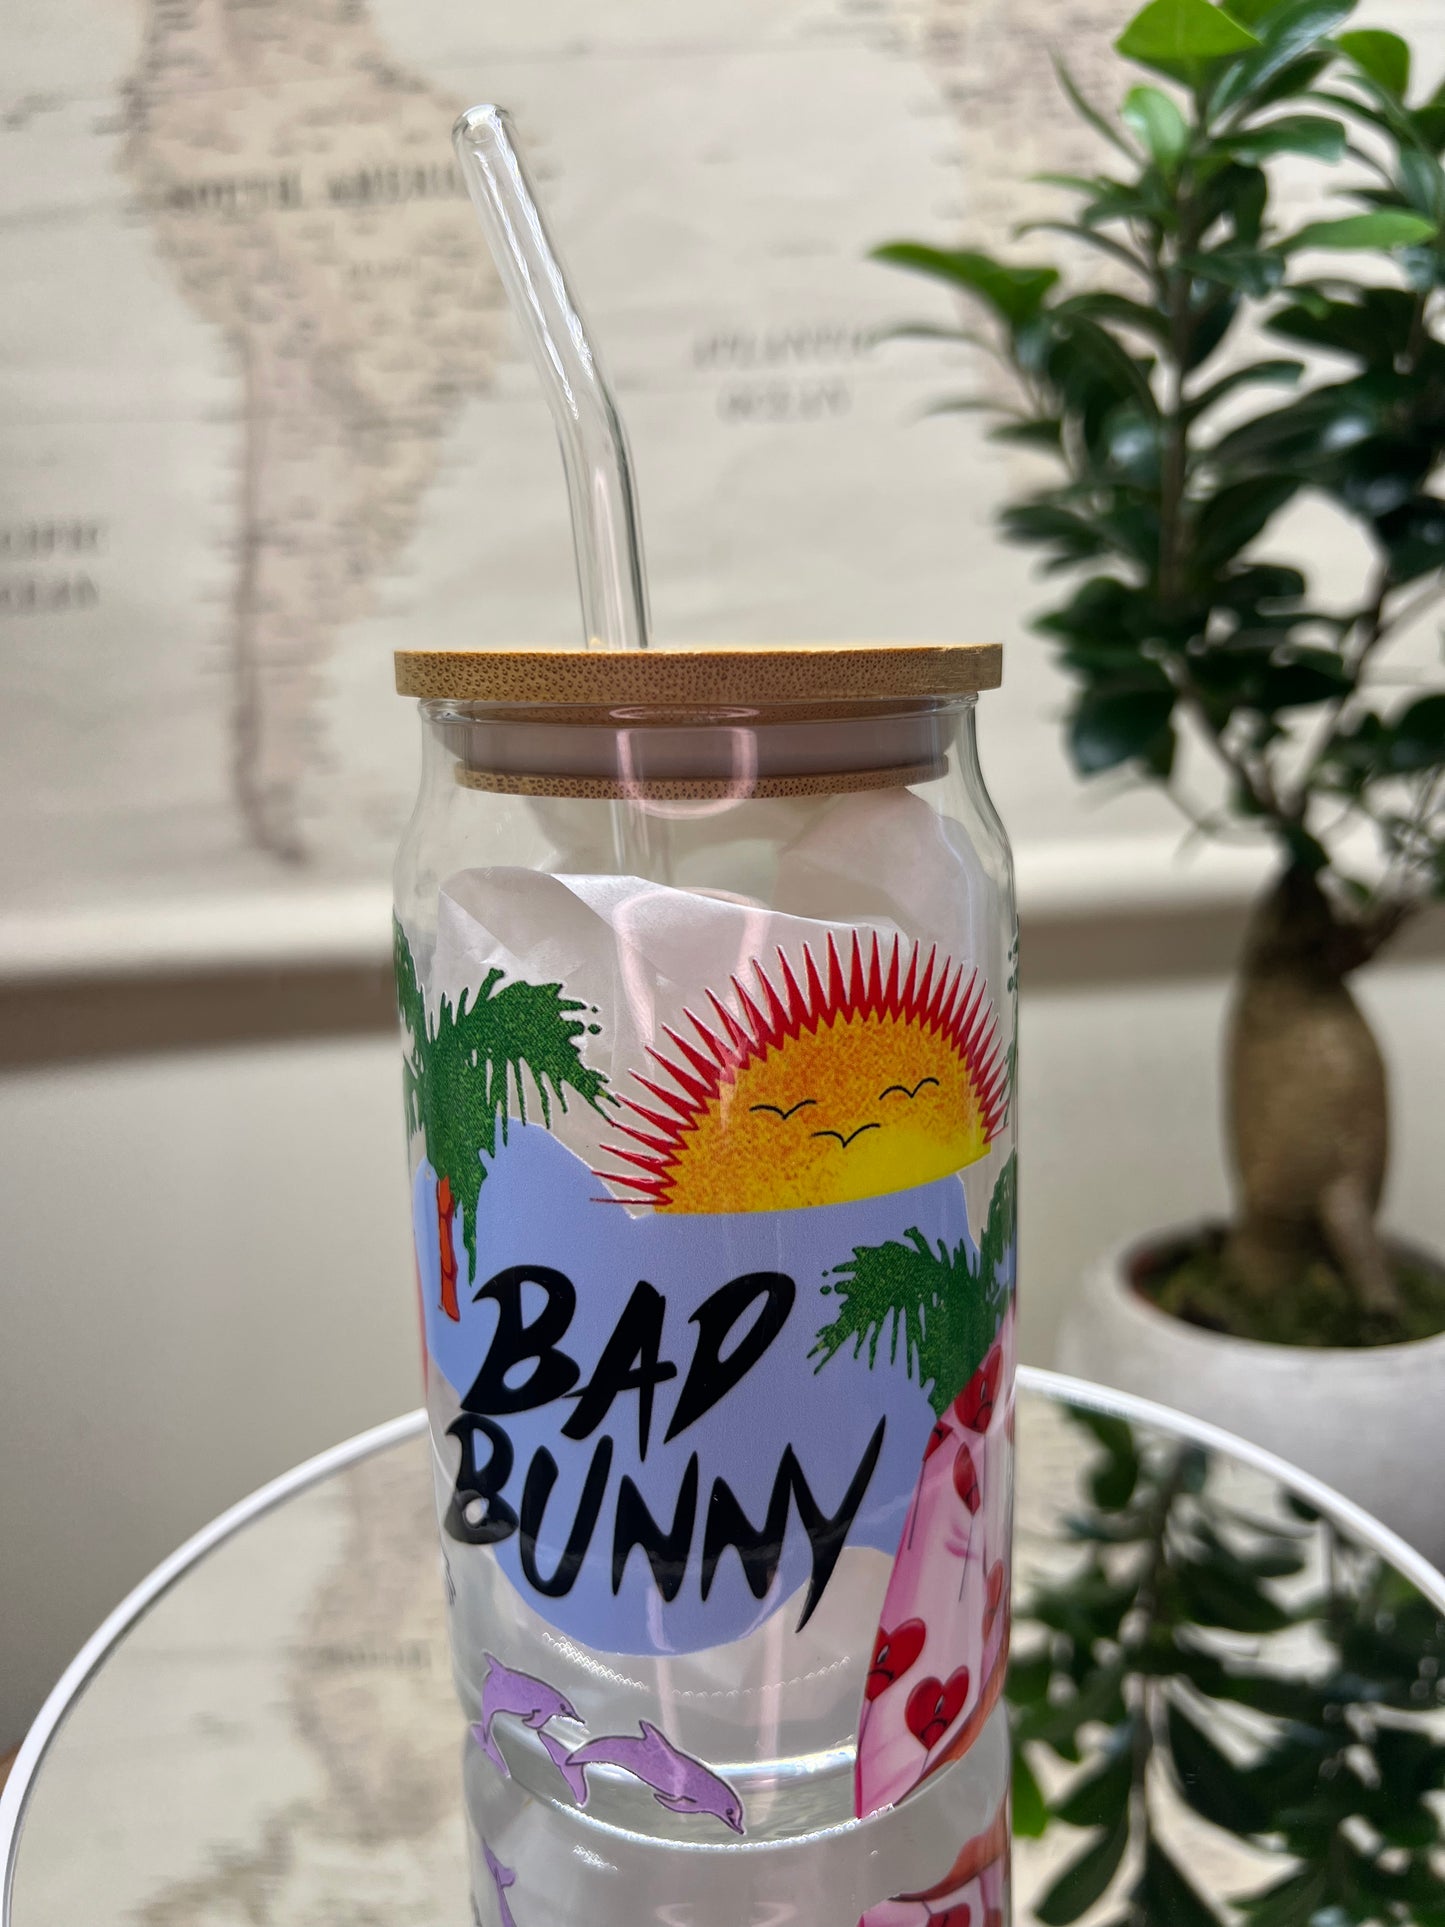 Bad bunny glass cup